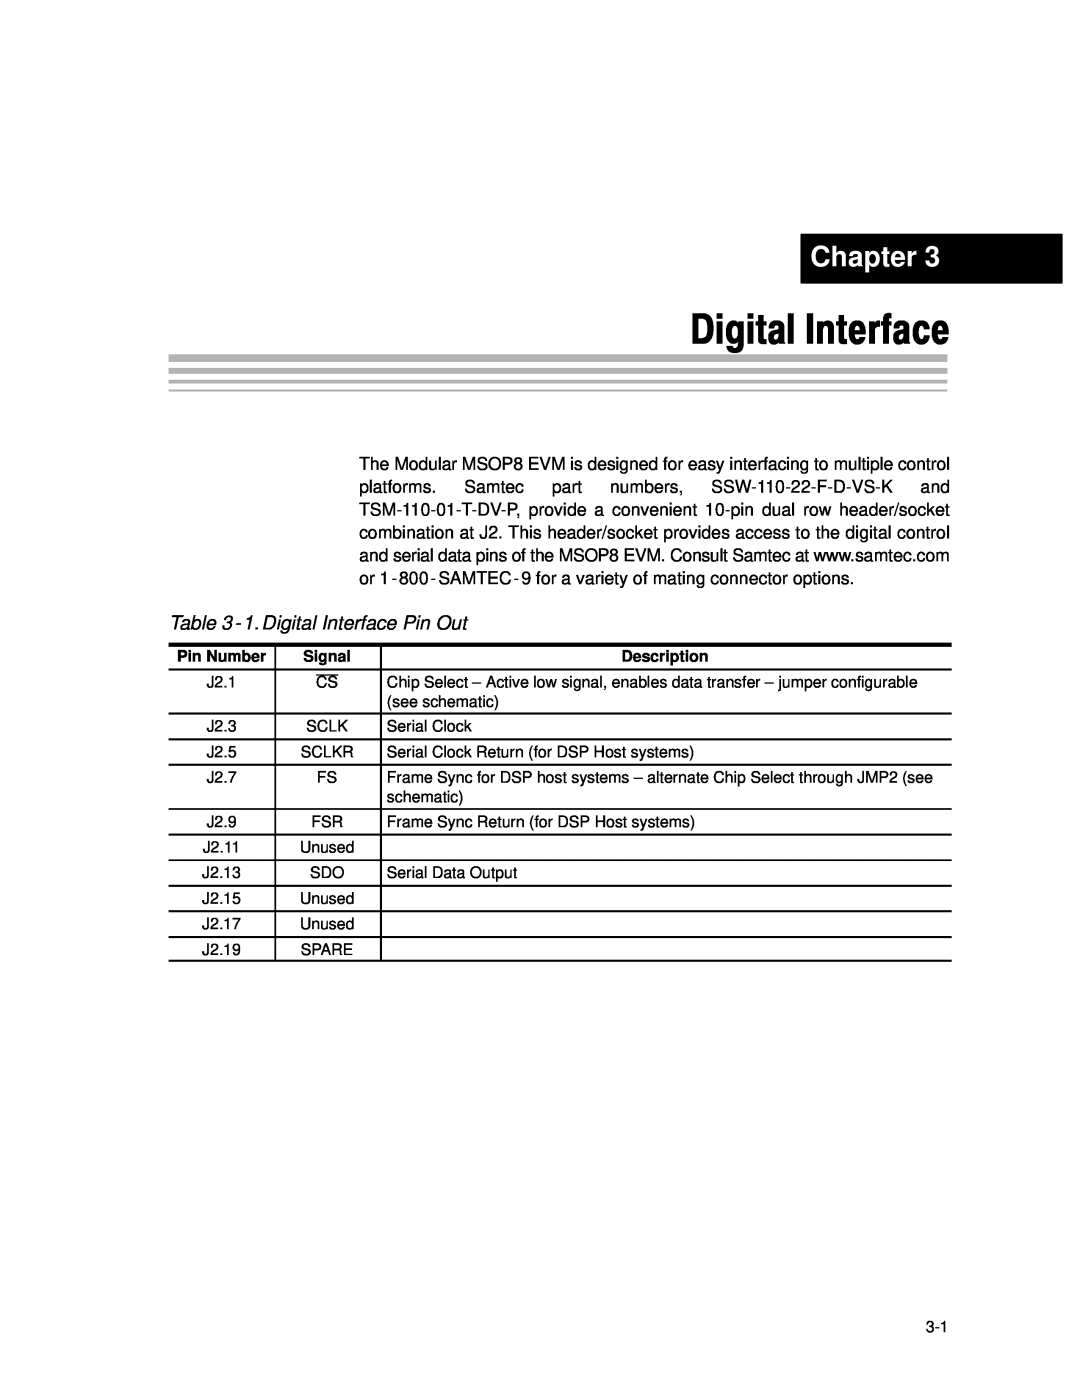 Texas Instruments MSOP8 manual 1. Digital Interface Pin Out, Chapter, Pin Number, Signal, Description 